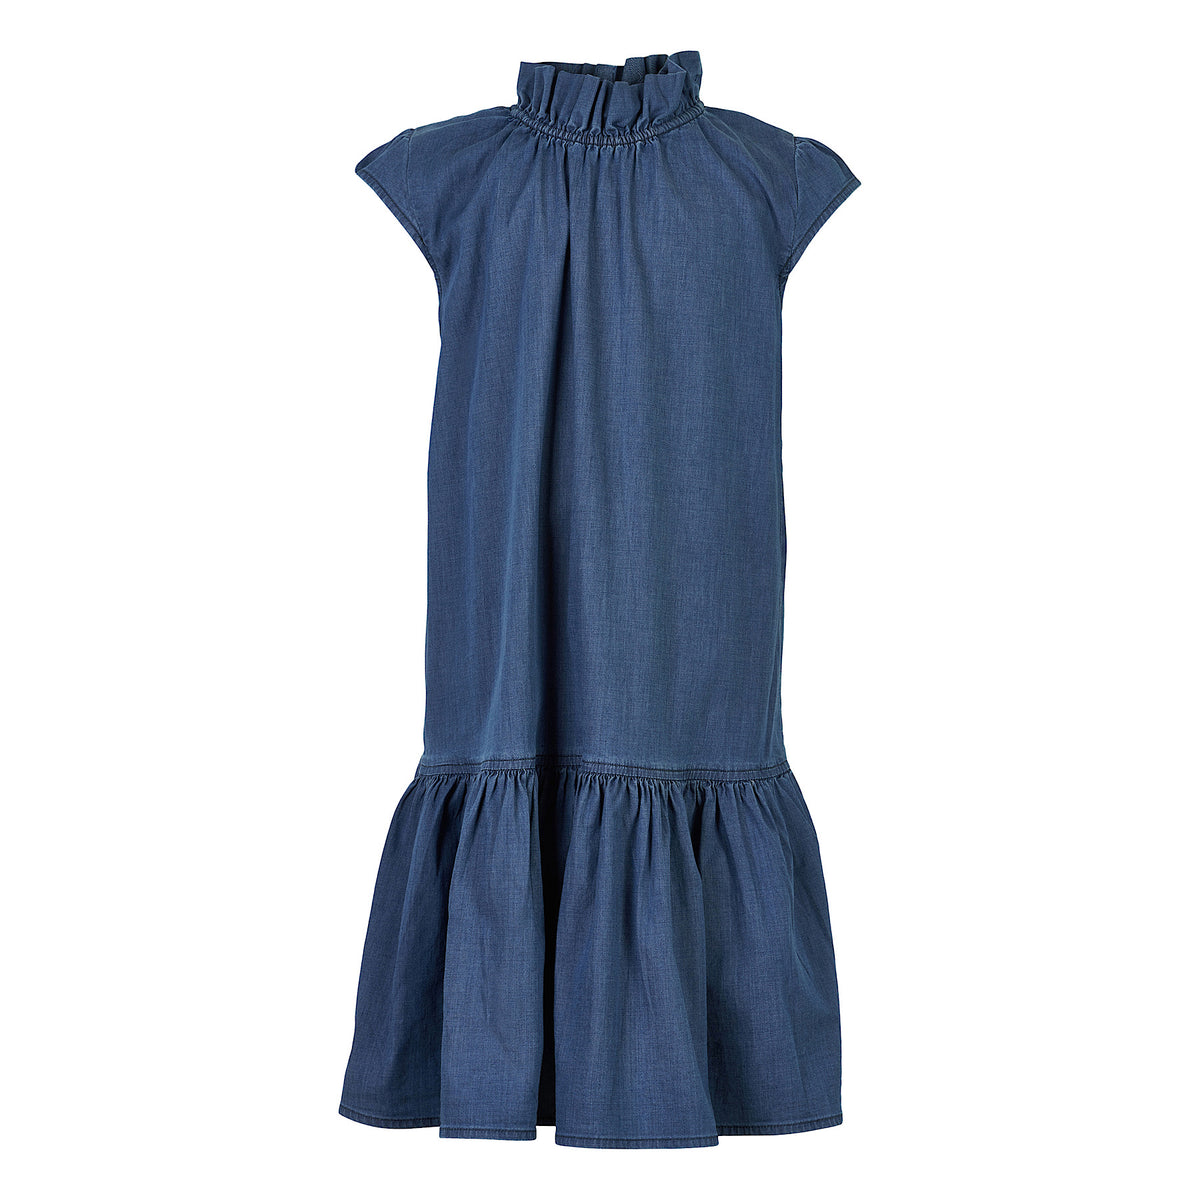 Chambray Dress with Frill Collar